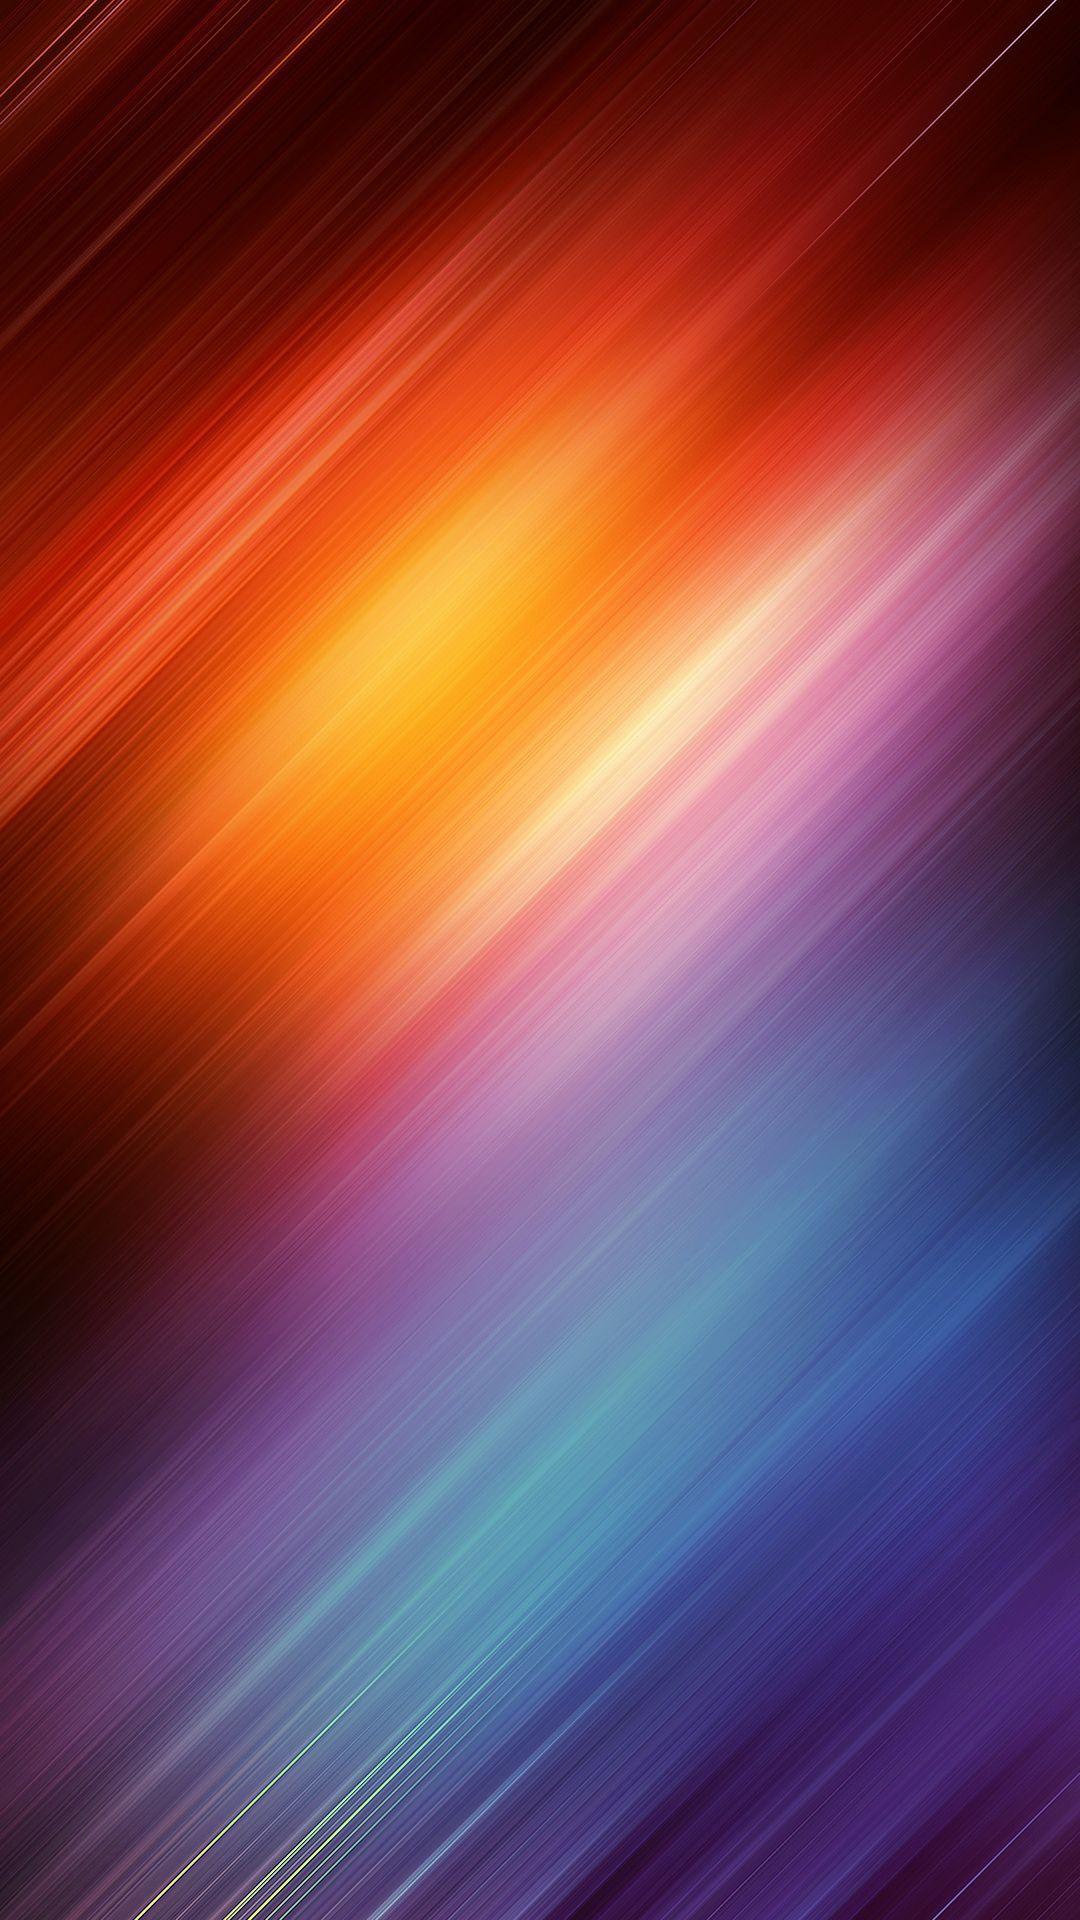 Wallpaper 1080x1920 Vertical Gallery (77 Plus) PIC WPW10585